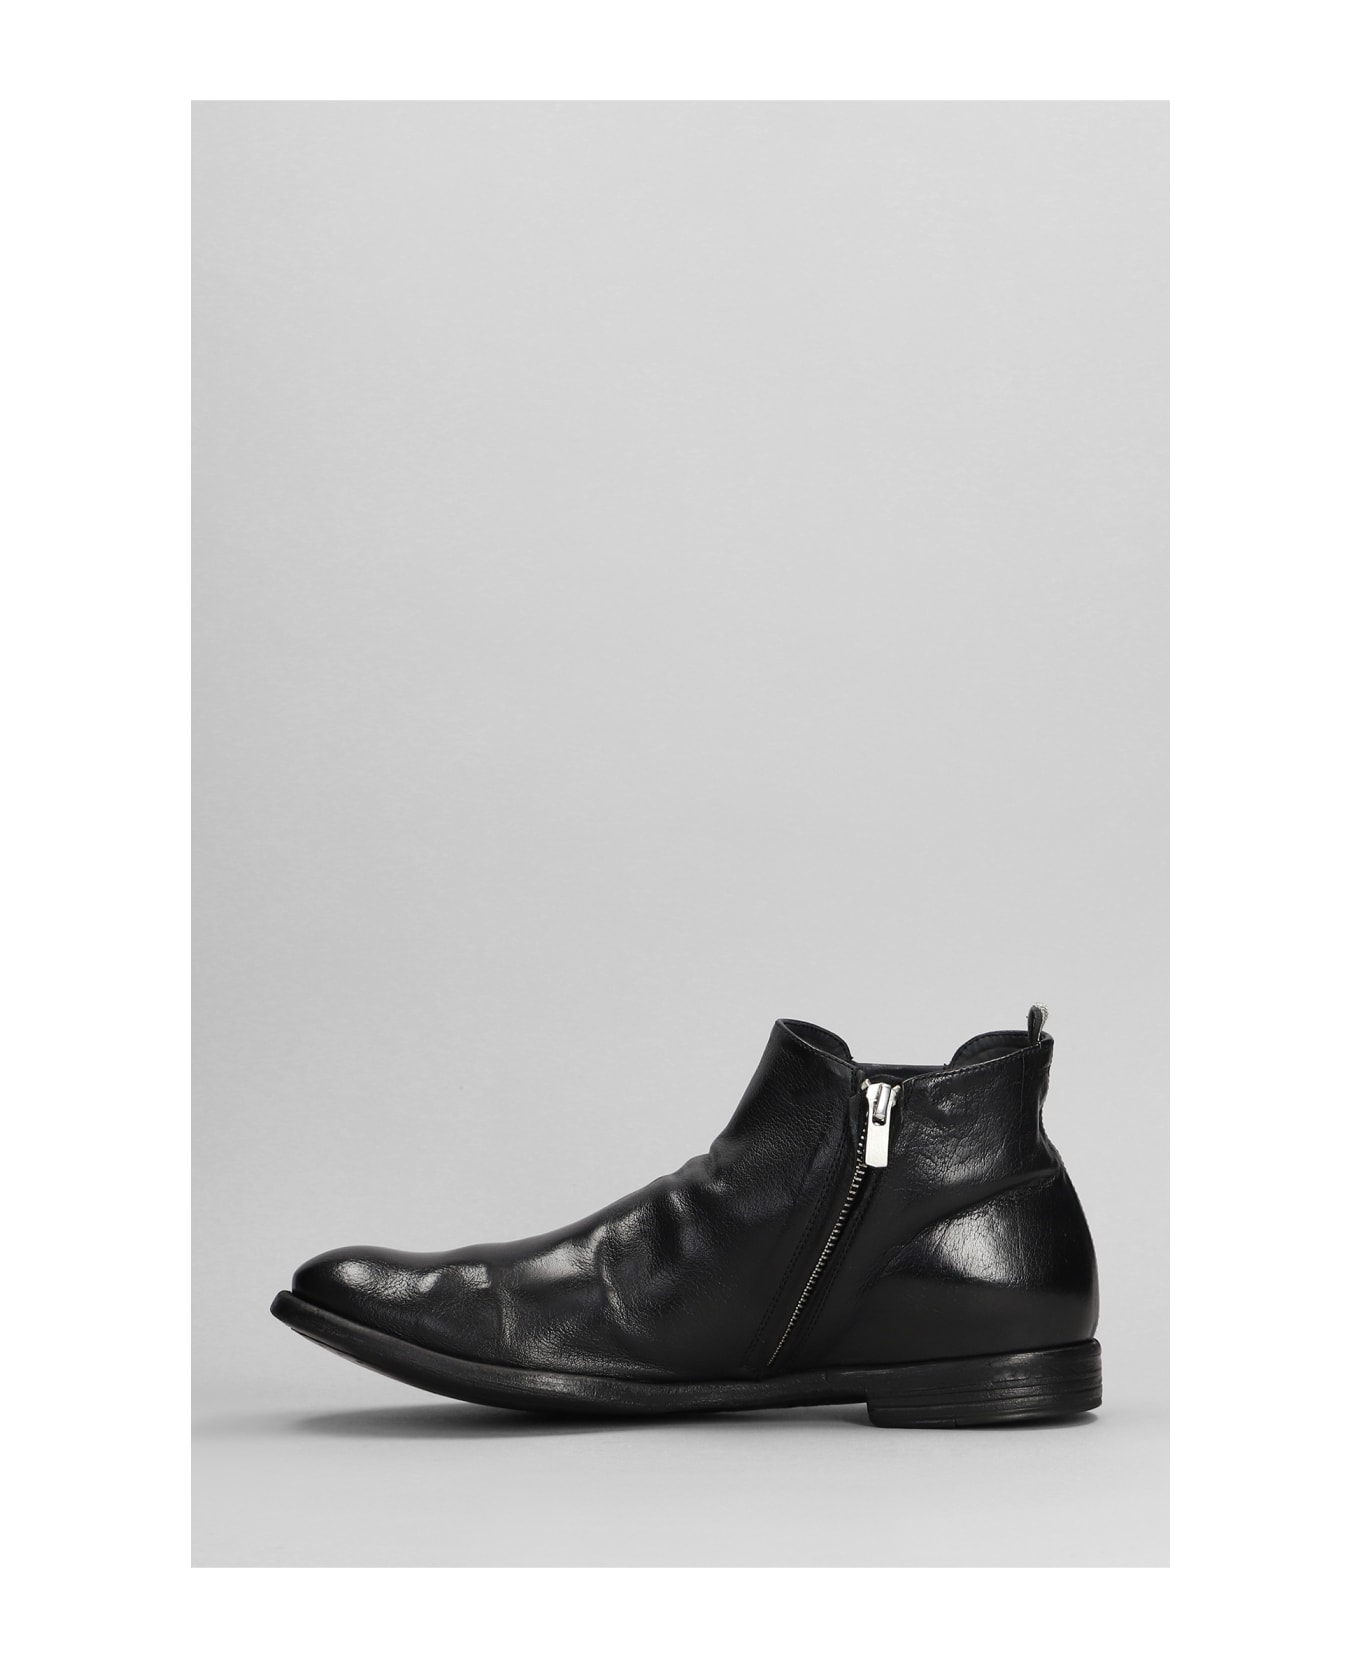 Officine Creative Arc -514 Ankle Boots In Black Leather - black